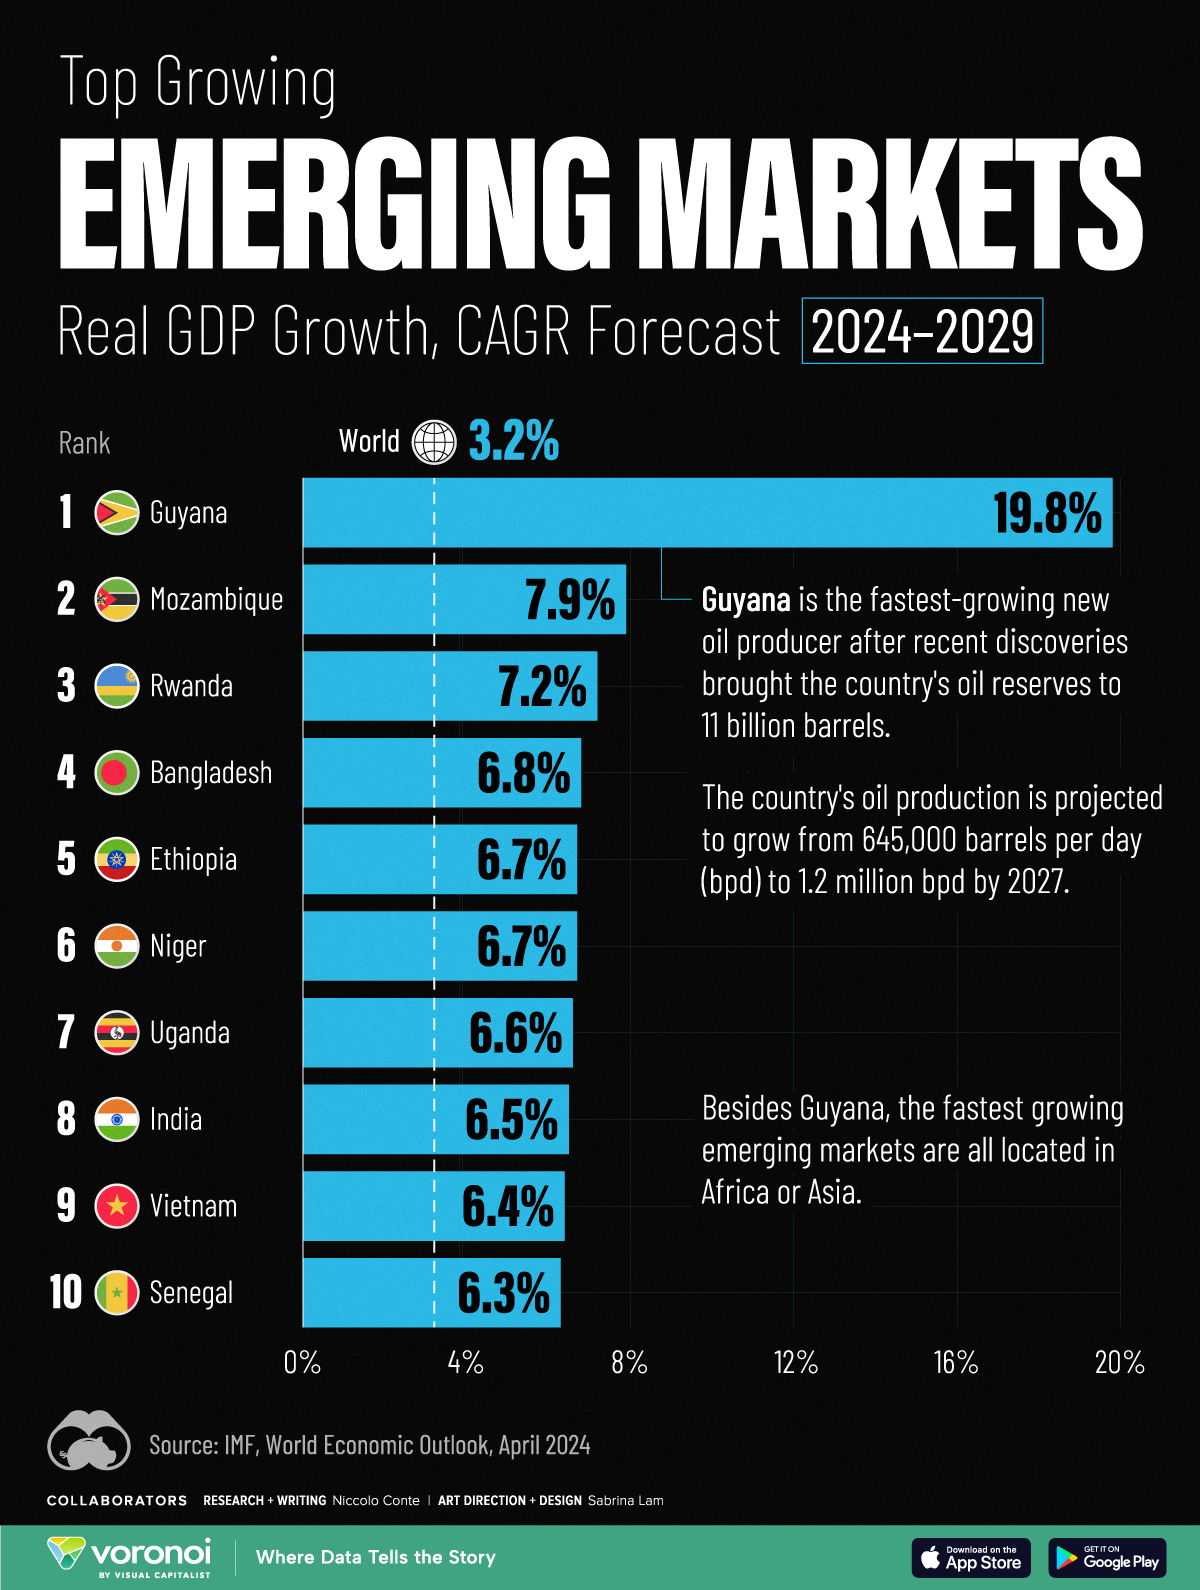 The World’s Fastest Growing Emerging Markets (2024-2029) : US Pioneer Global VC DIFCHQ NYC India Singapore – Riyadh Norway Our Mind